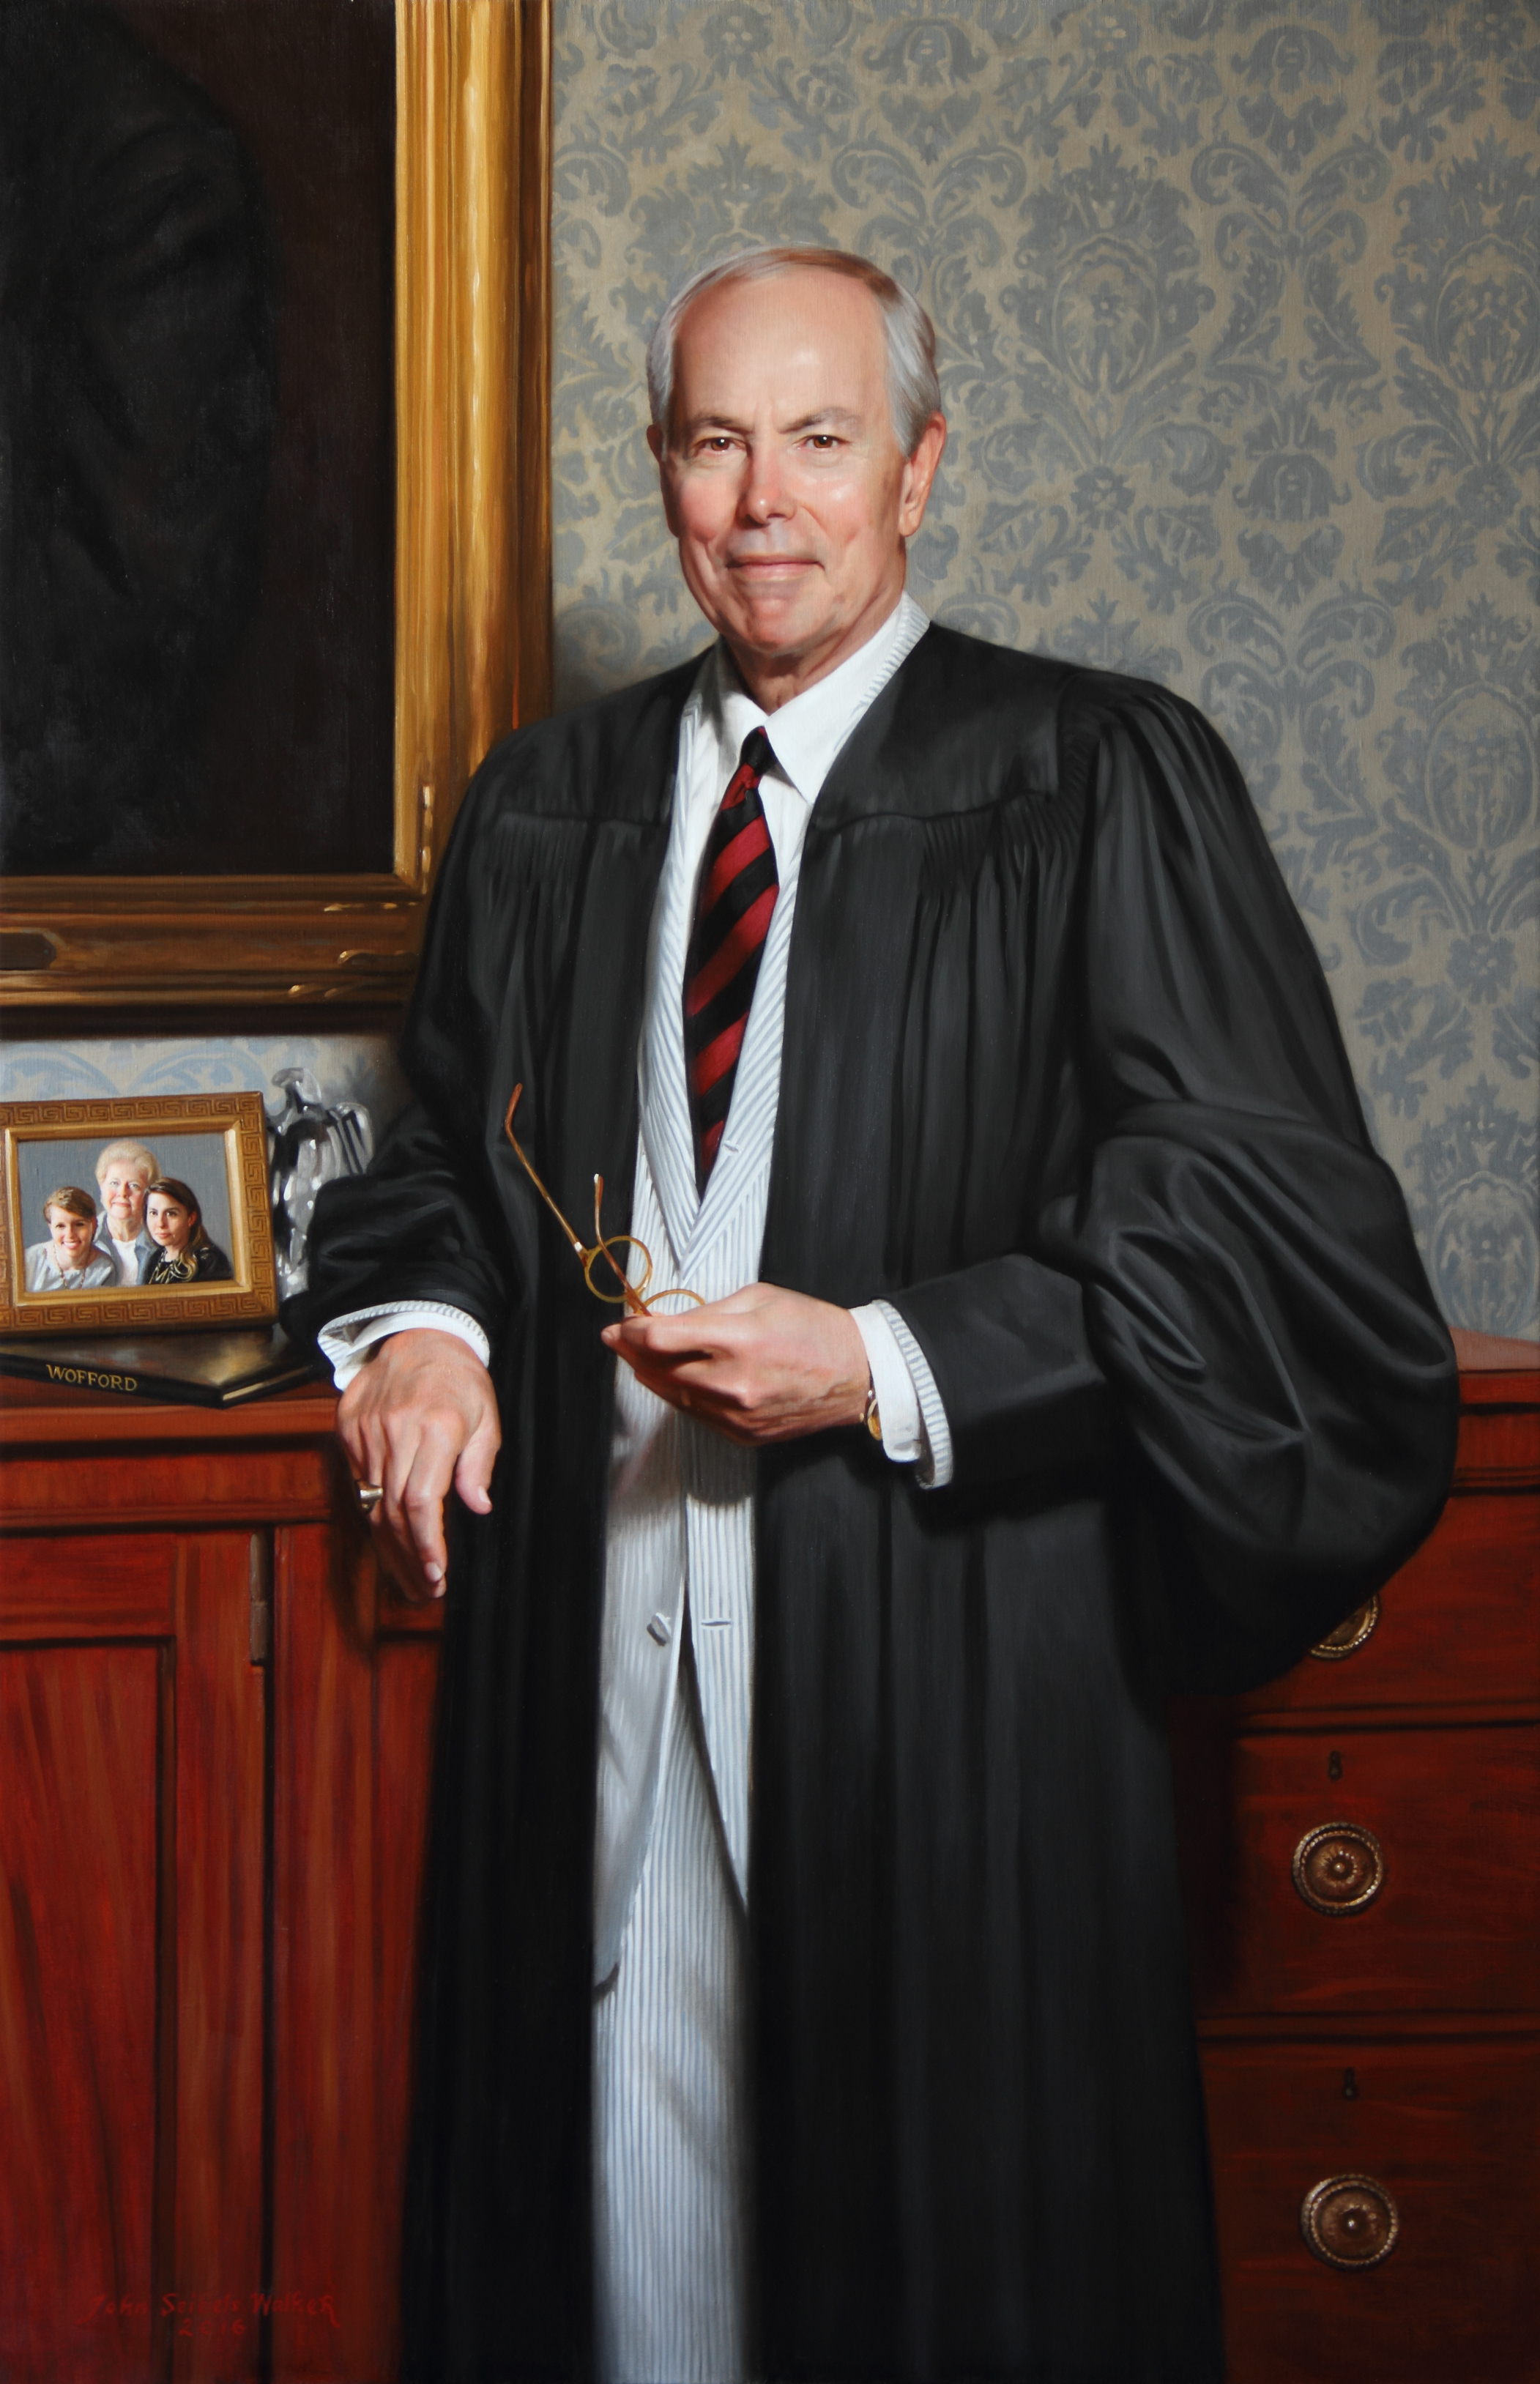 The Hon. Costa Pleicones Chief Justice Supreme Court of South Carolina Oil on linen, 58 x 38 inches 